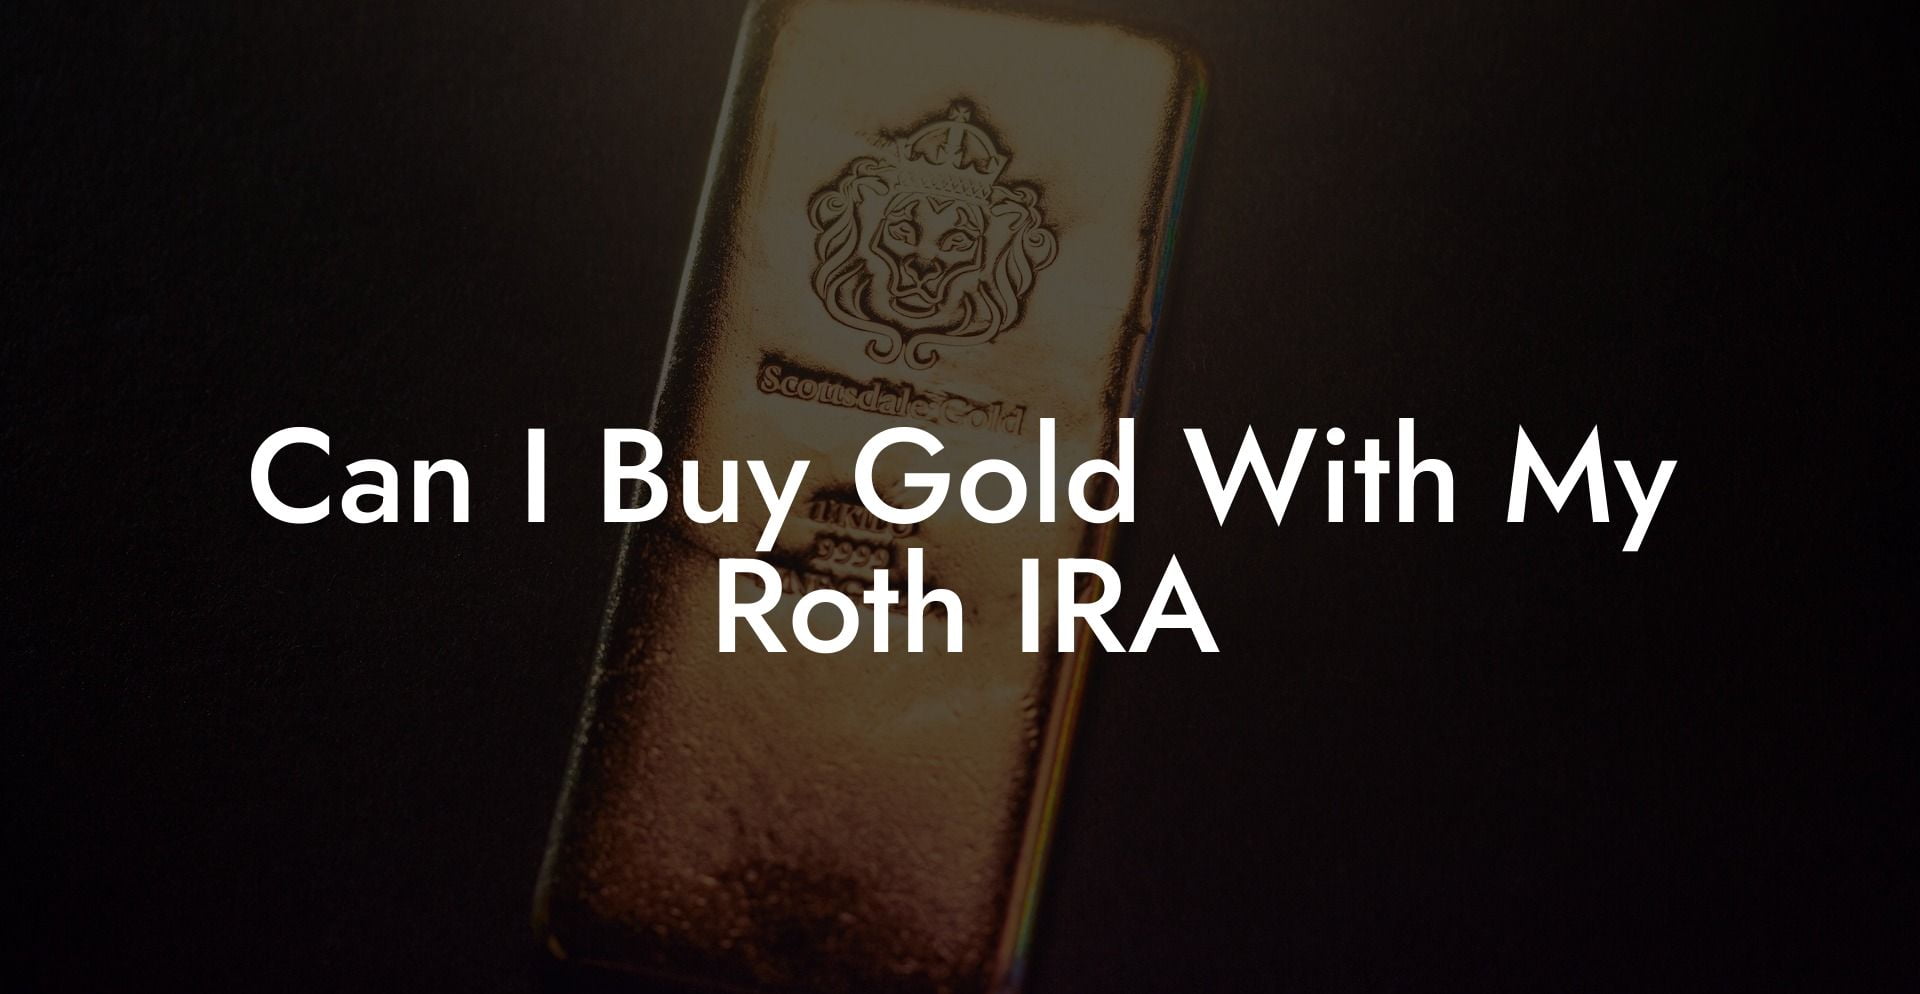 Can I Buy Gold With My Roth IRA